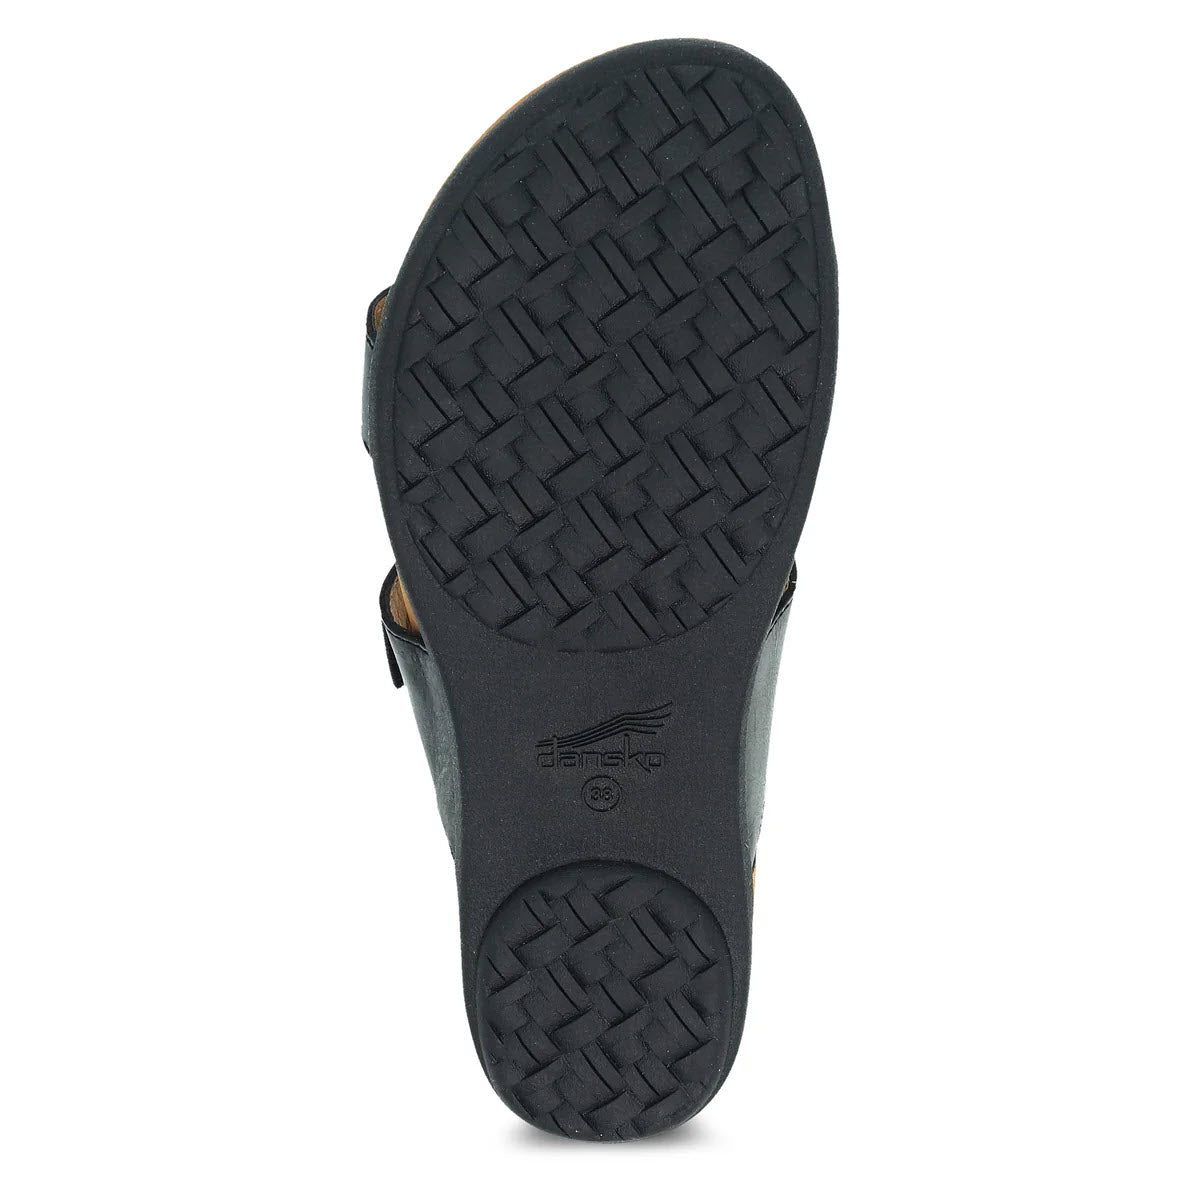 Bottom view of a Dansko Justine Black slide sandal with a black, woven-pattern sole displaying a logo.